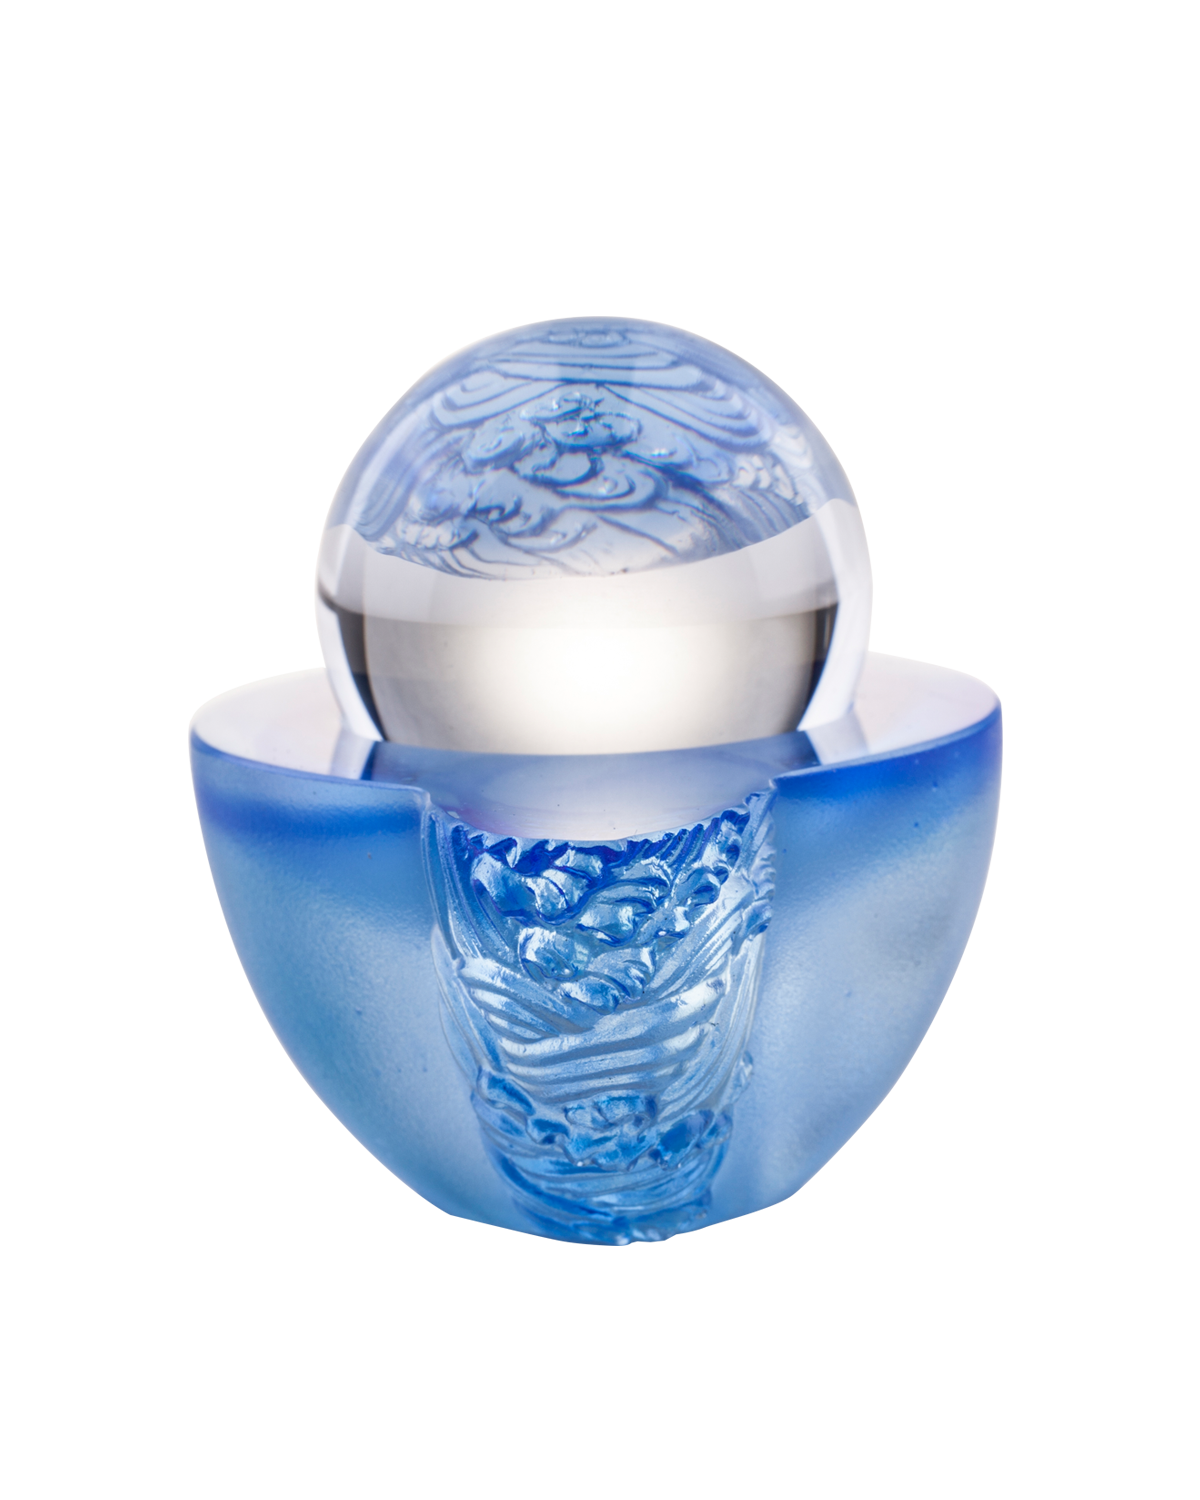 LIULI Crystal Art Crystal Paperweight "As the good world turns" Feng Shui Sculpture in Blue